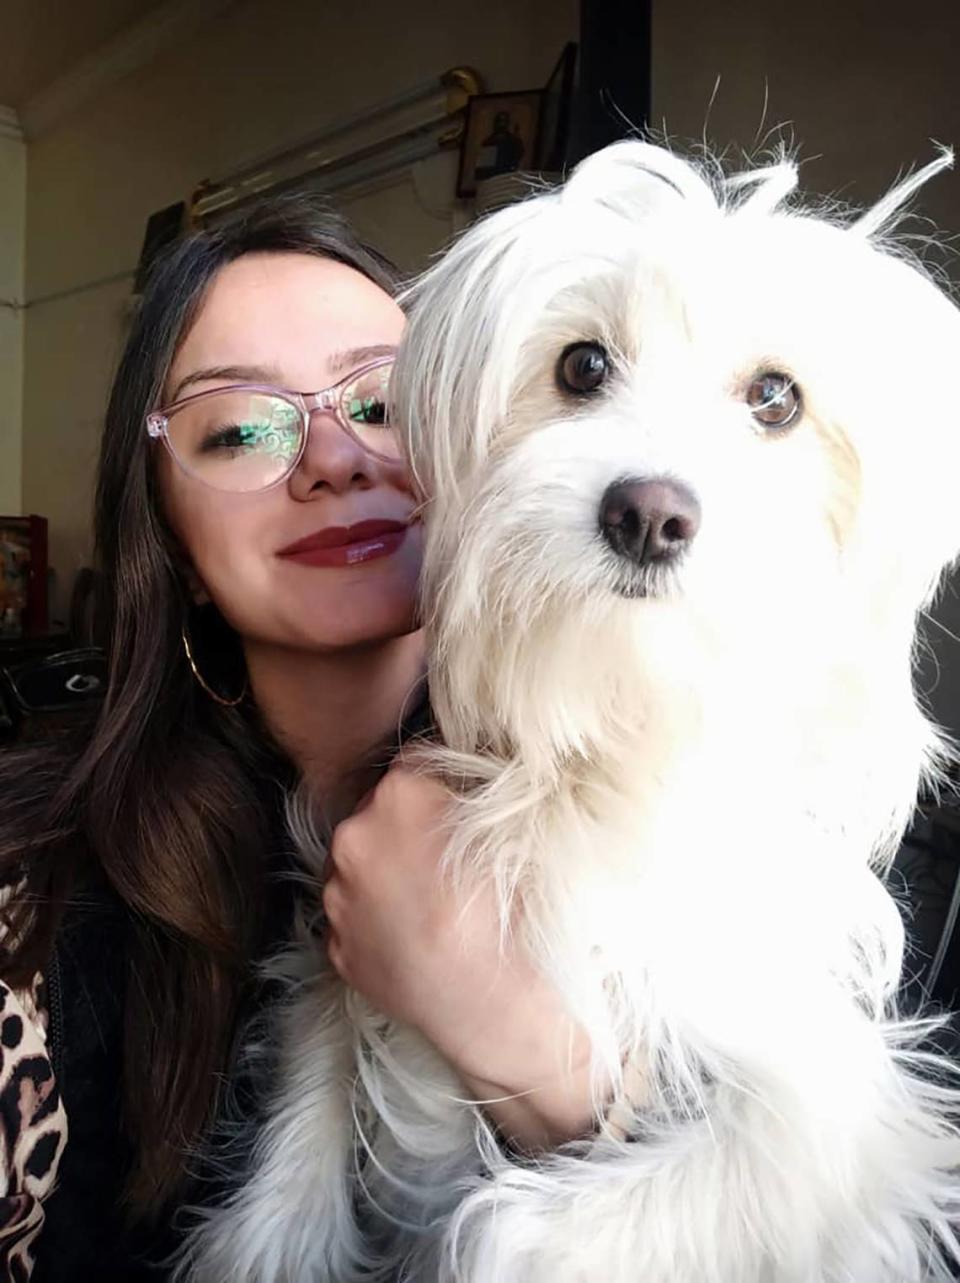 A GoFundMe is raising money to reunite Syrian refugee Nour Makhoul with her dog, Tuti. Makhoul arrived in San Luis Obispo in April after her family fled the war-torn country.